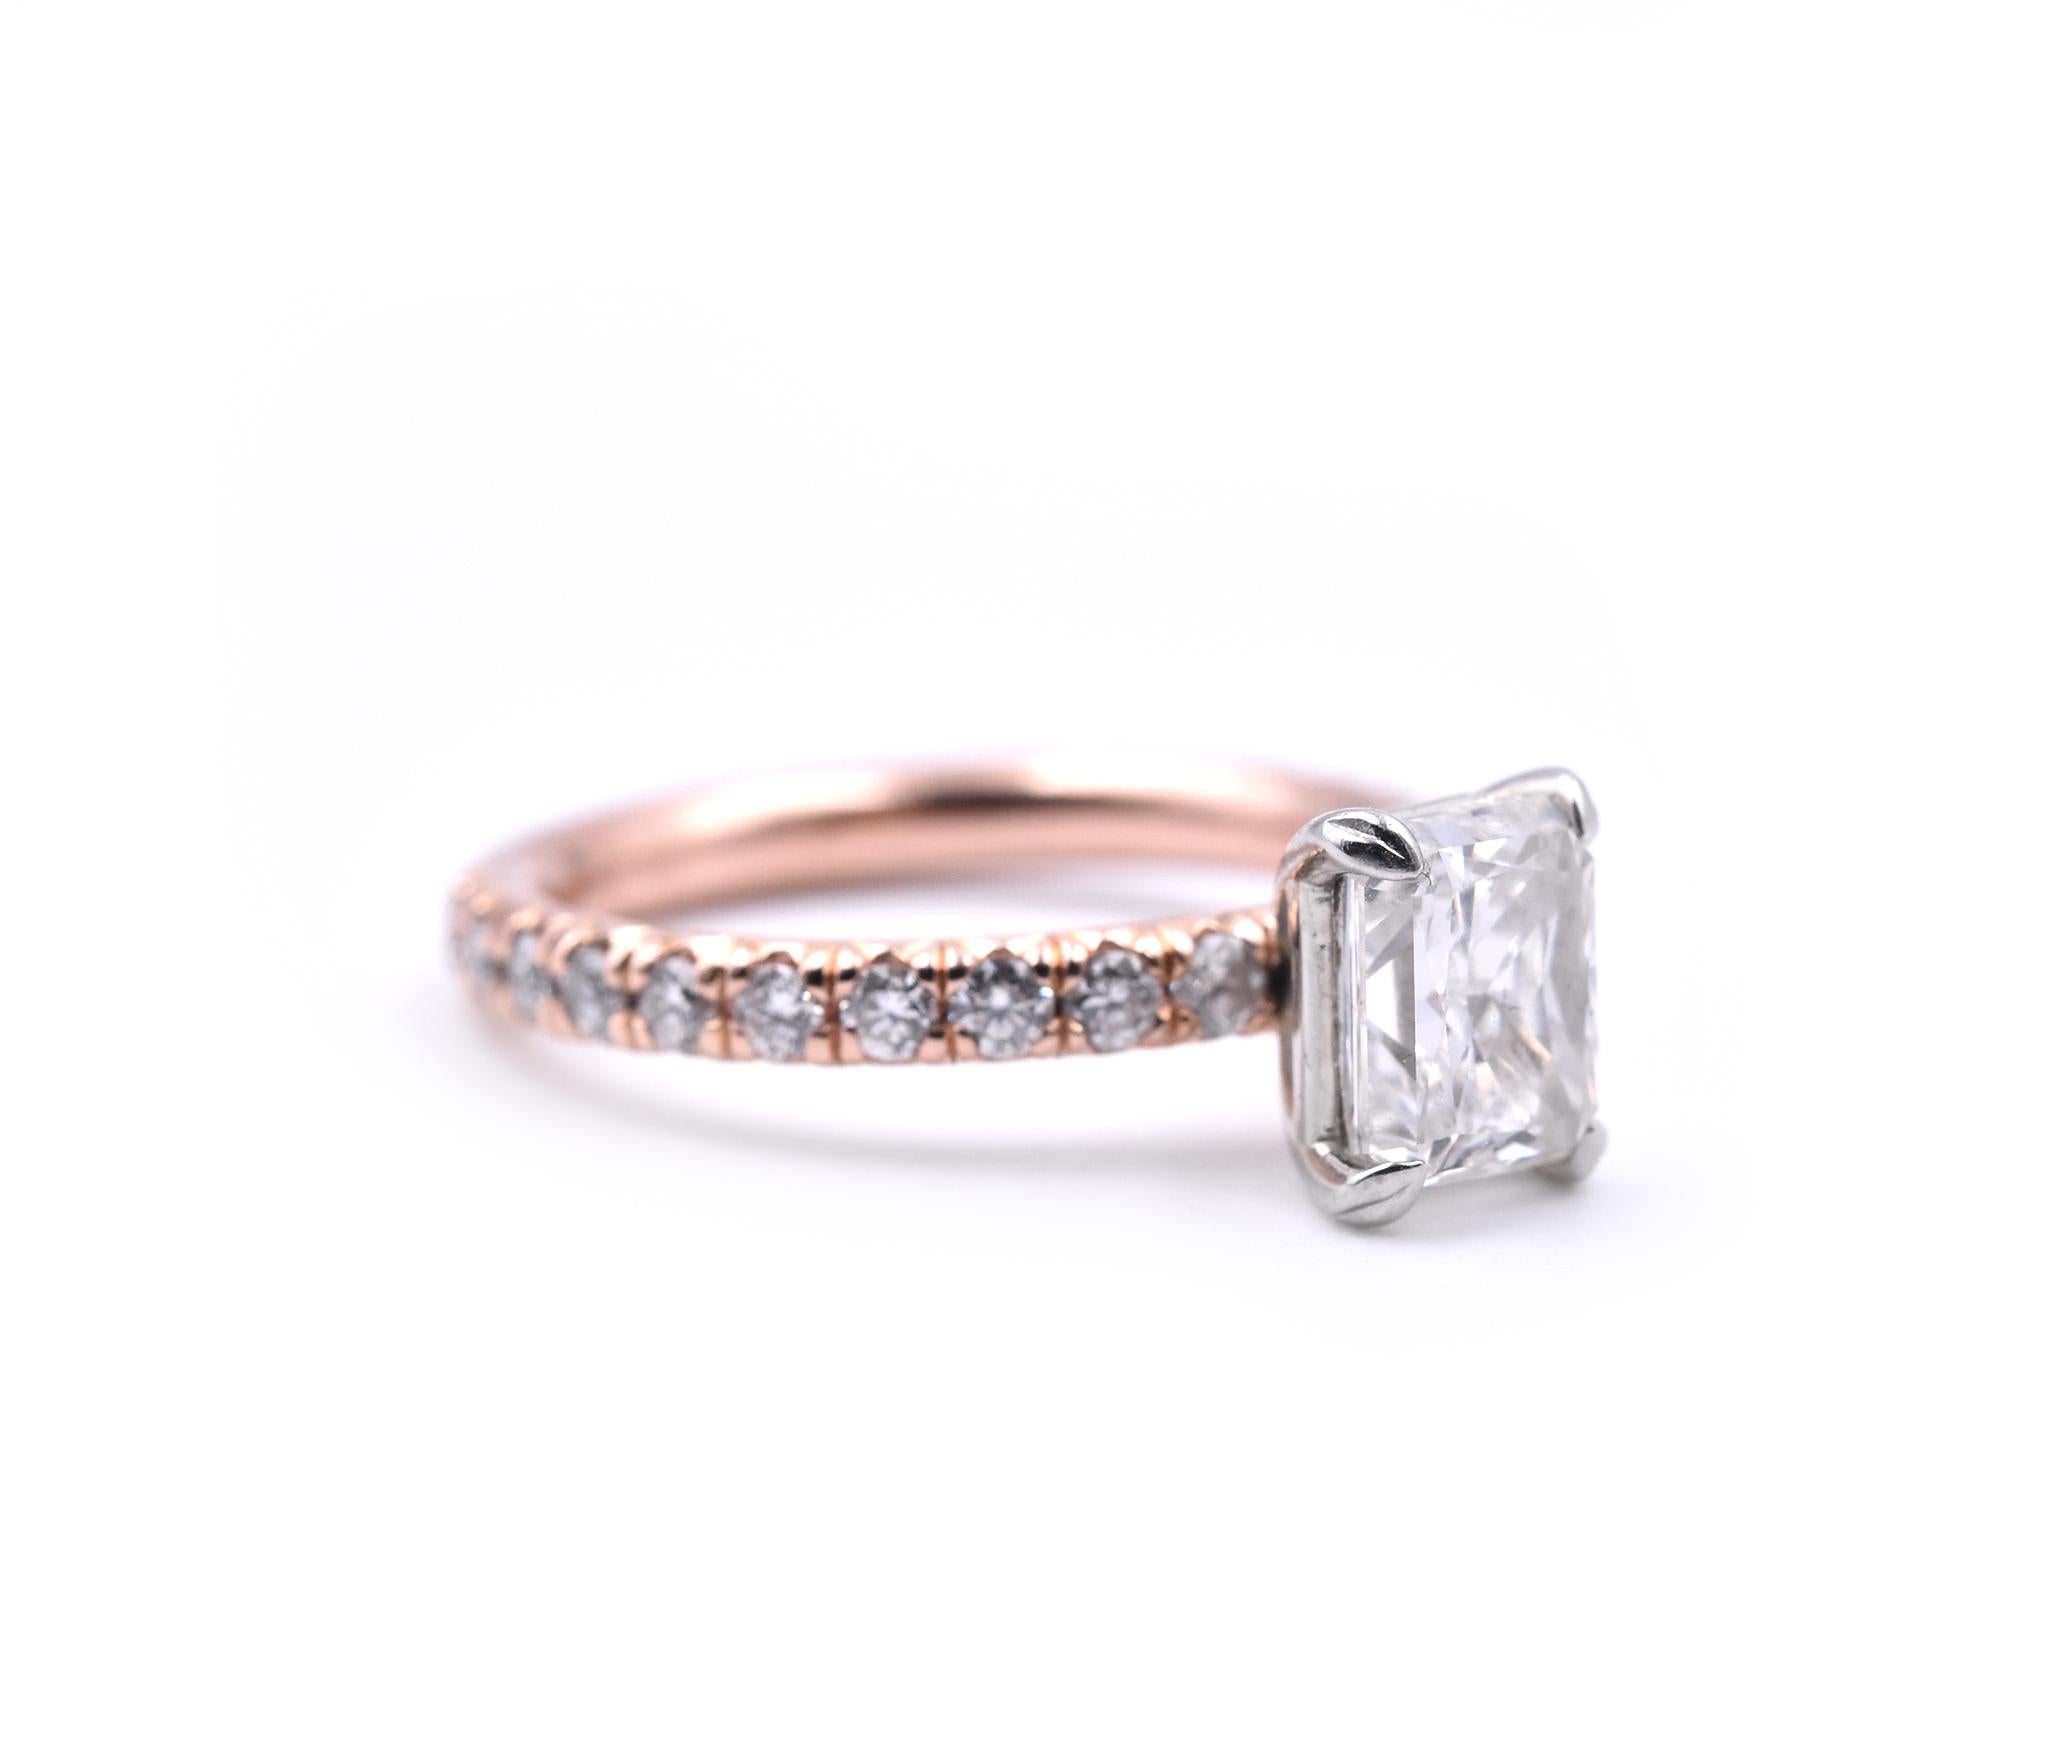 Designer: custom design
Material: 14k rose gold
Center Diamond: 1 Radiant Cut = 1.27ct
Color: H
Clarity: SI1
Cert: GIA 2131609278
Diamonds: 20 Round Brilliant Cuts = .50cttw H SI1
Ring Size: 4.75 (please allow two additional shipping days for sizing